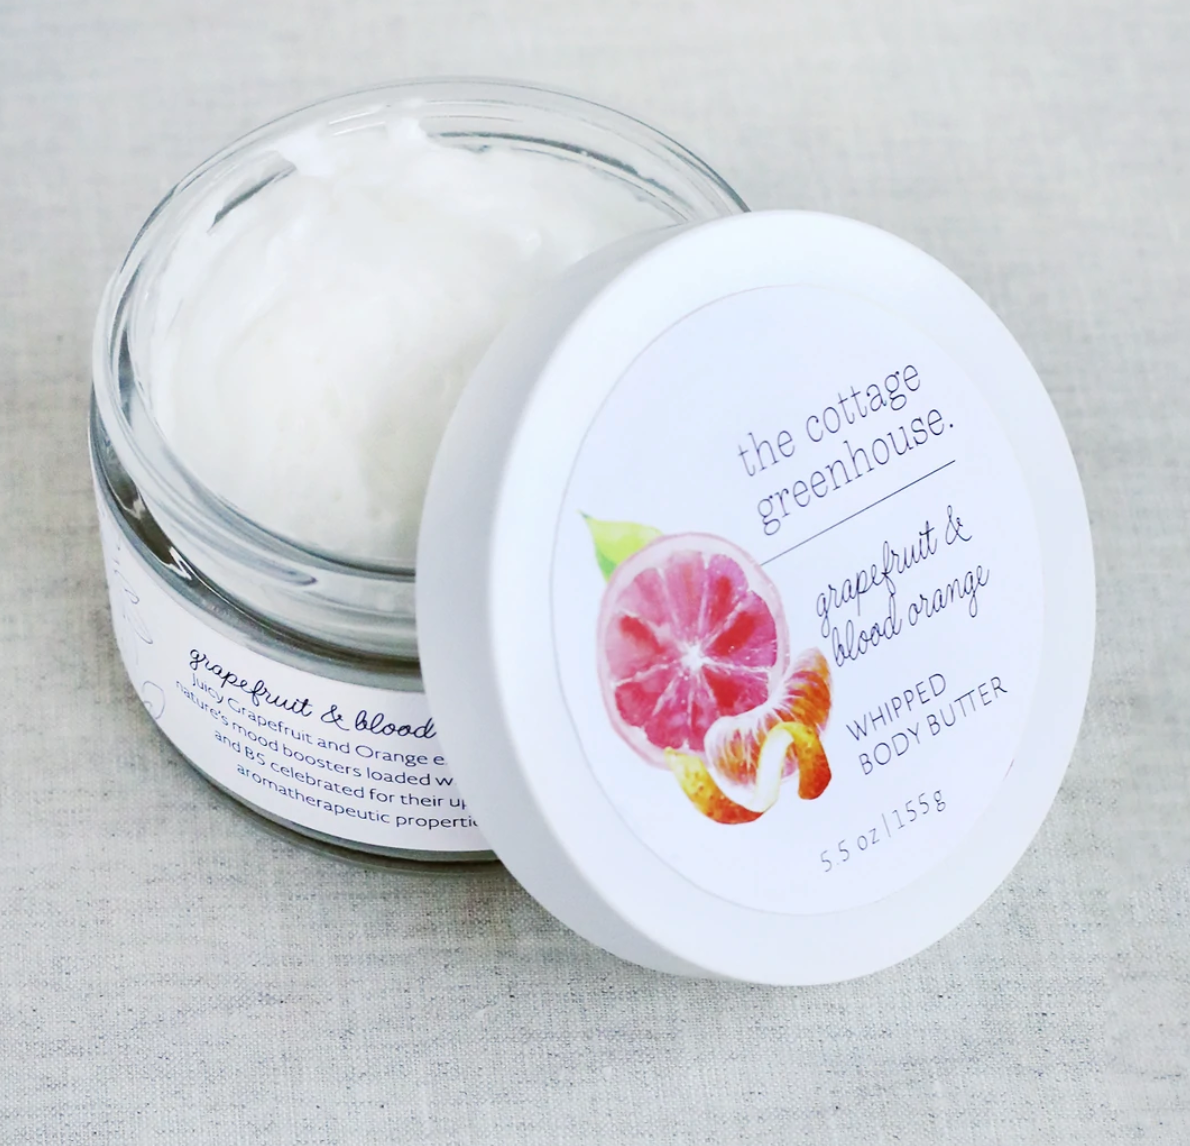 The Cottage Greenhouse Body Butter